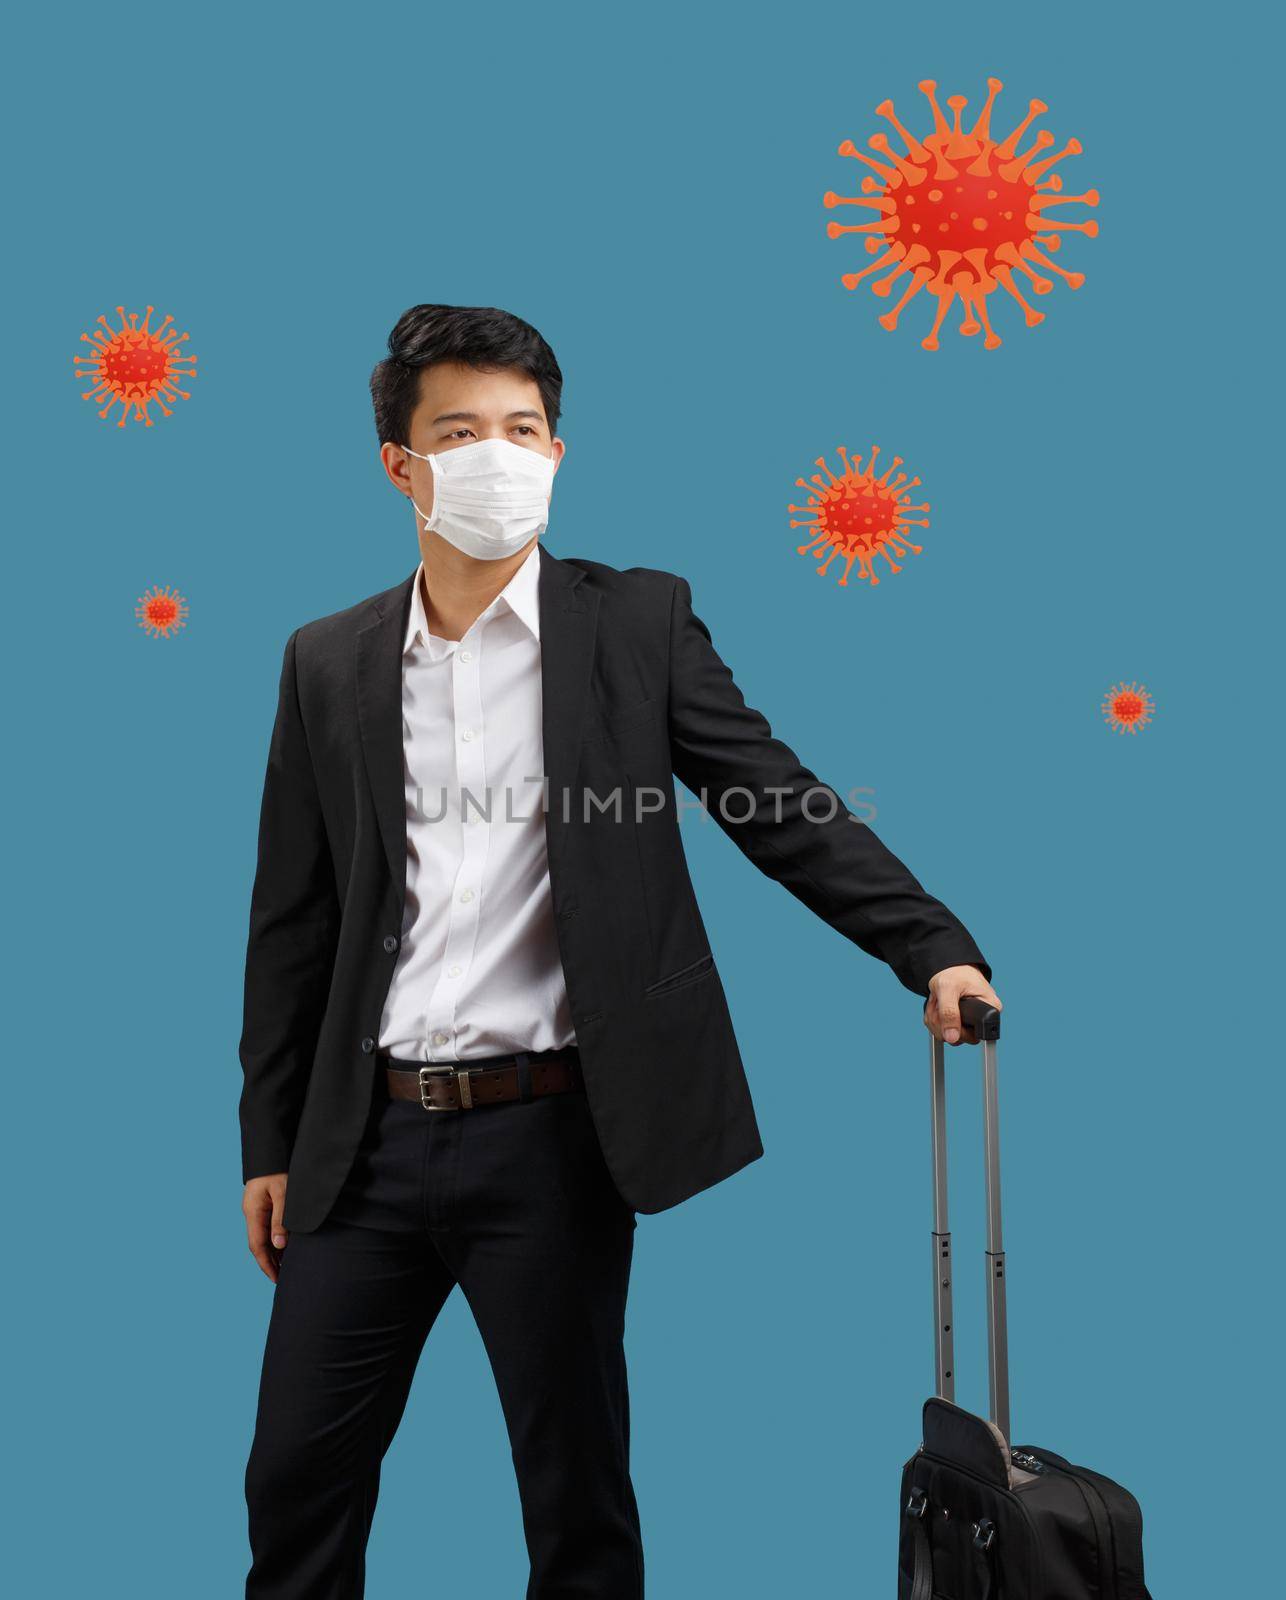 New normal lifestyle ,Business man travelling and wearing face mask protect coronavirus covid-19